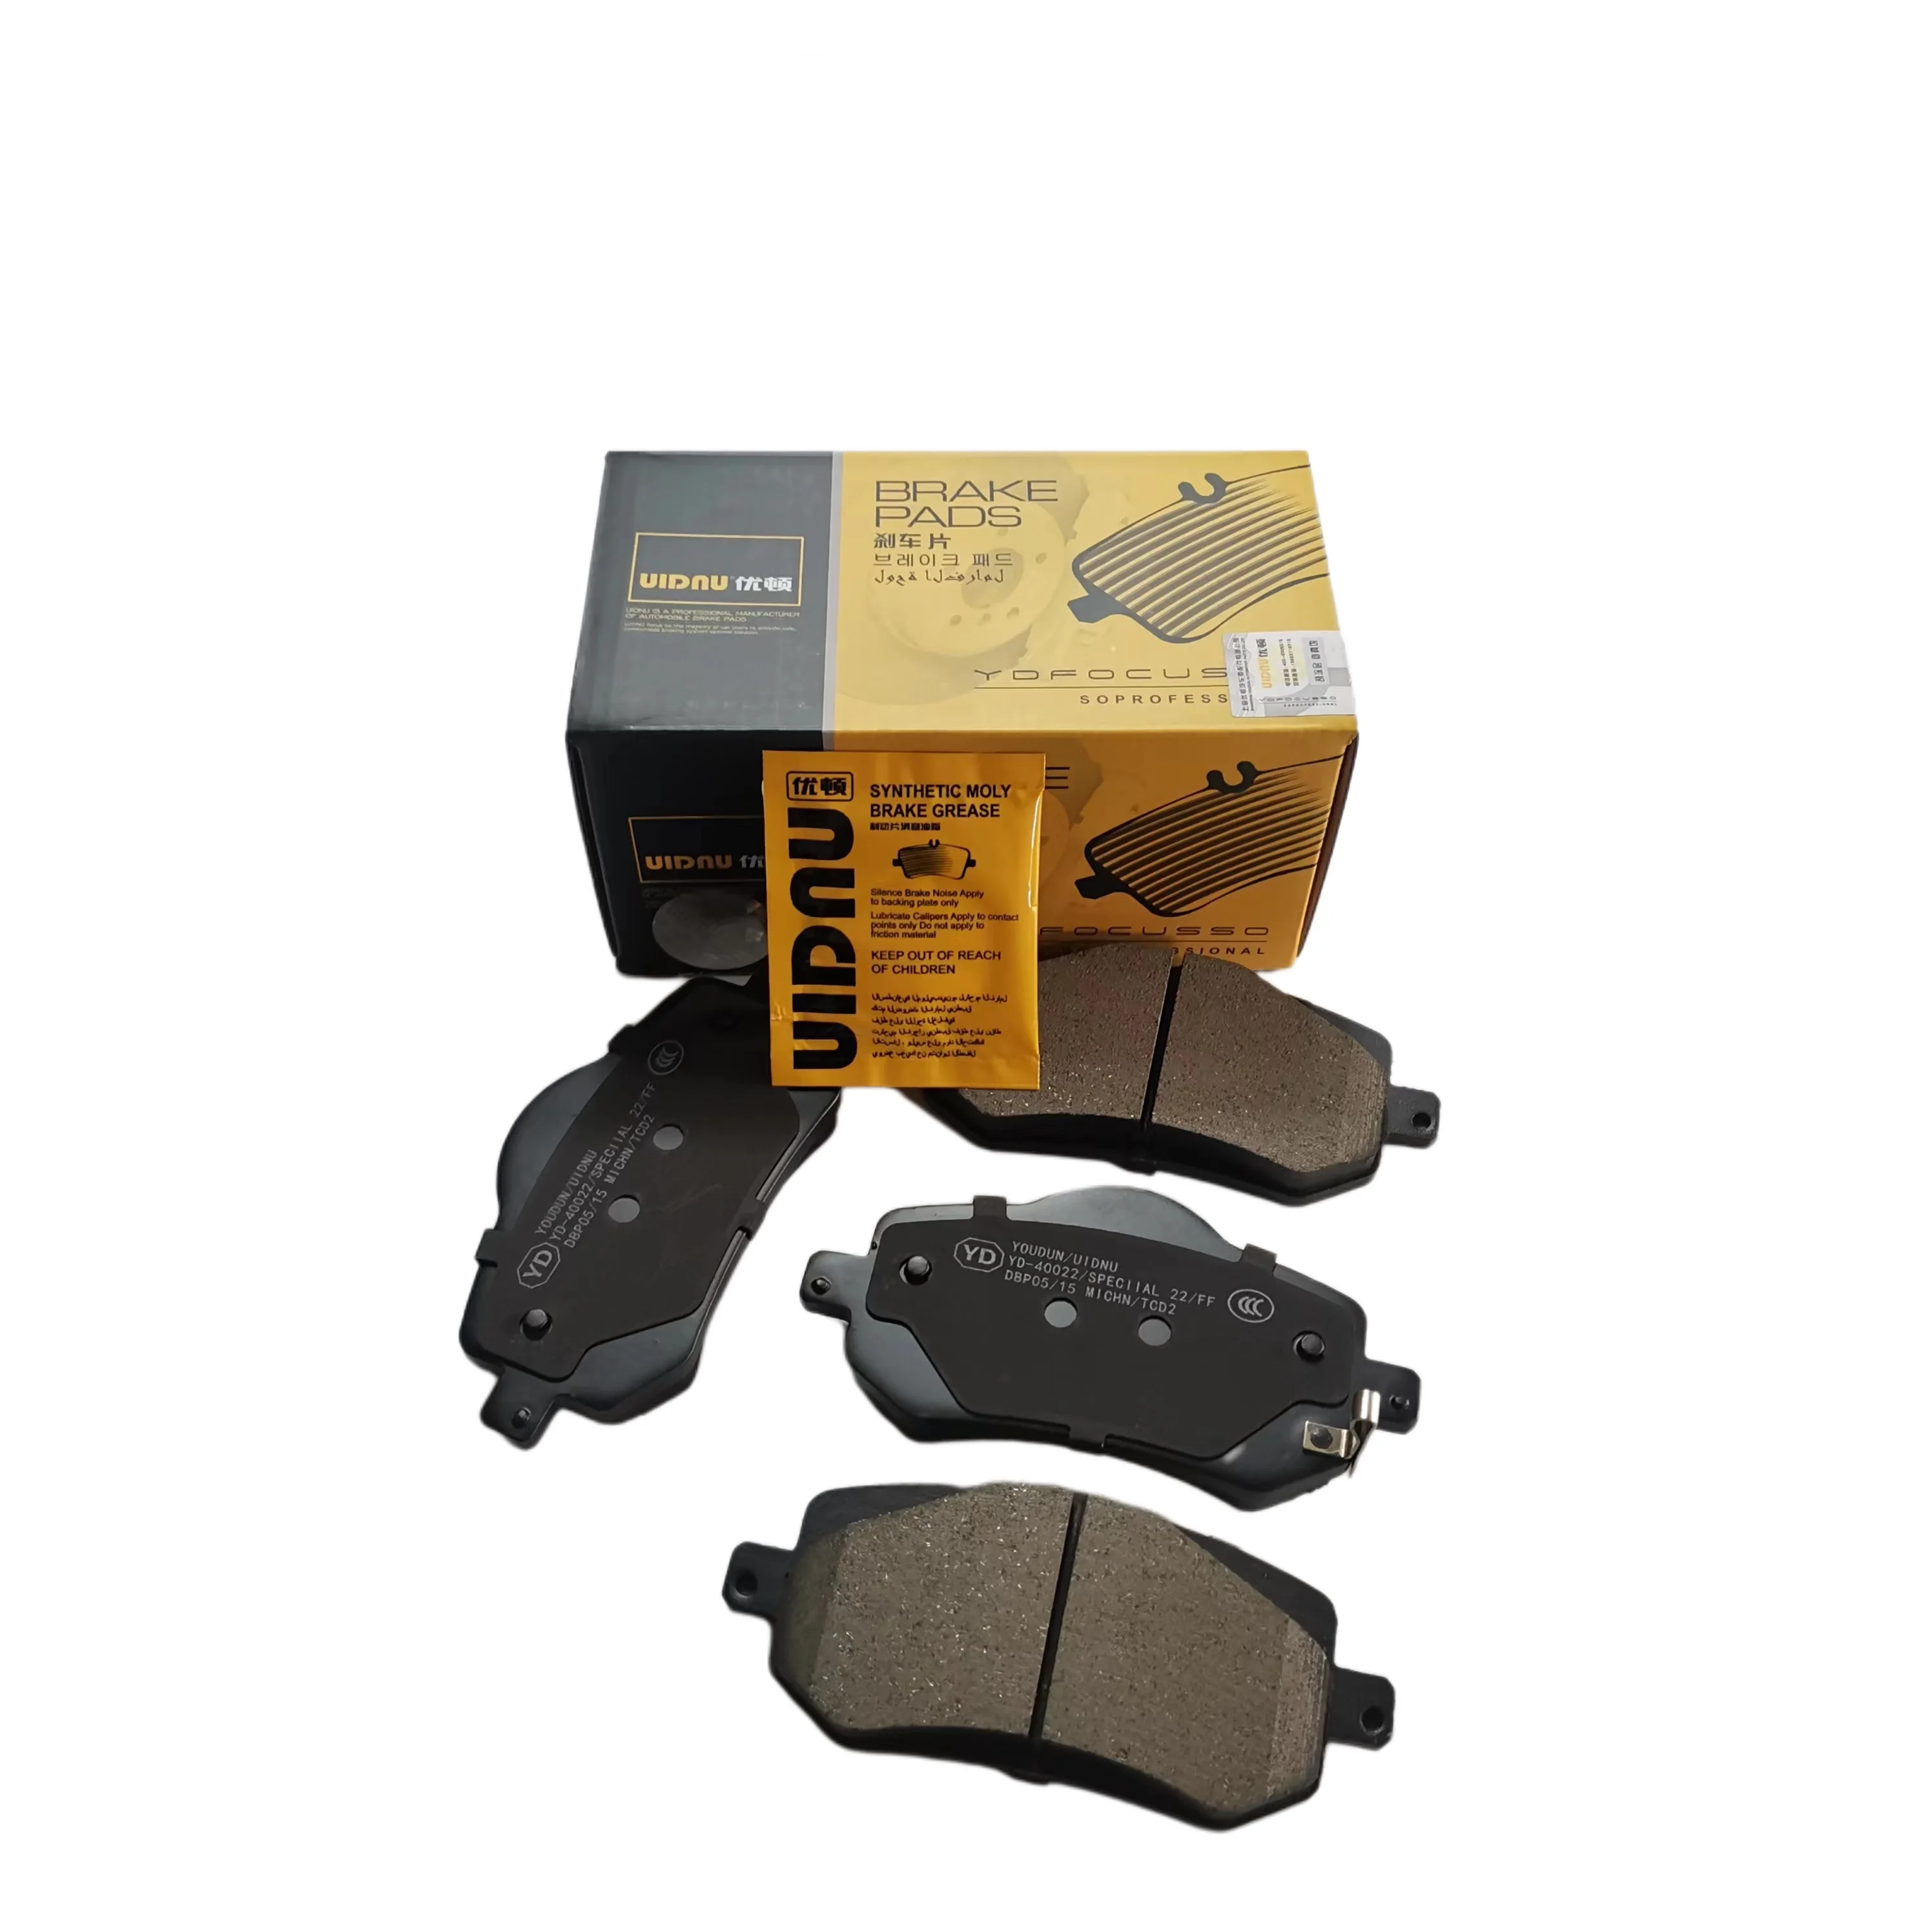 Yd-40022 4048090200 M1e-3501080 For Geely Emgrand 7/chery Arrizo 8 Front  Ceramic Brake Pads Factory Sends Wholesale Price - Buy Geely Emgrand 7  Geely Emperor 4, yd-40022 4048090200 M1e-3501080, 